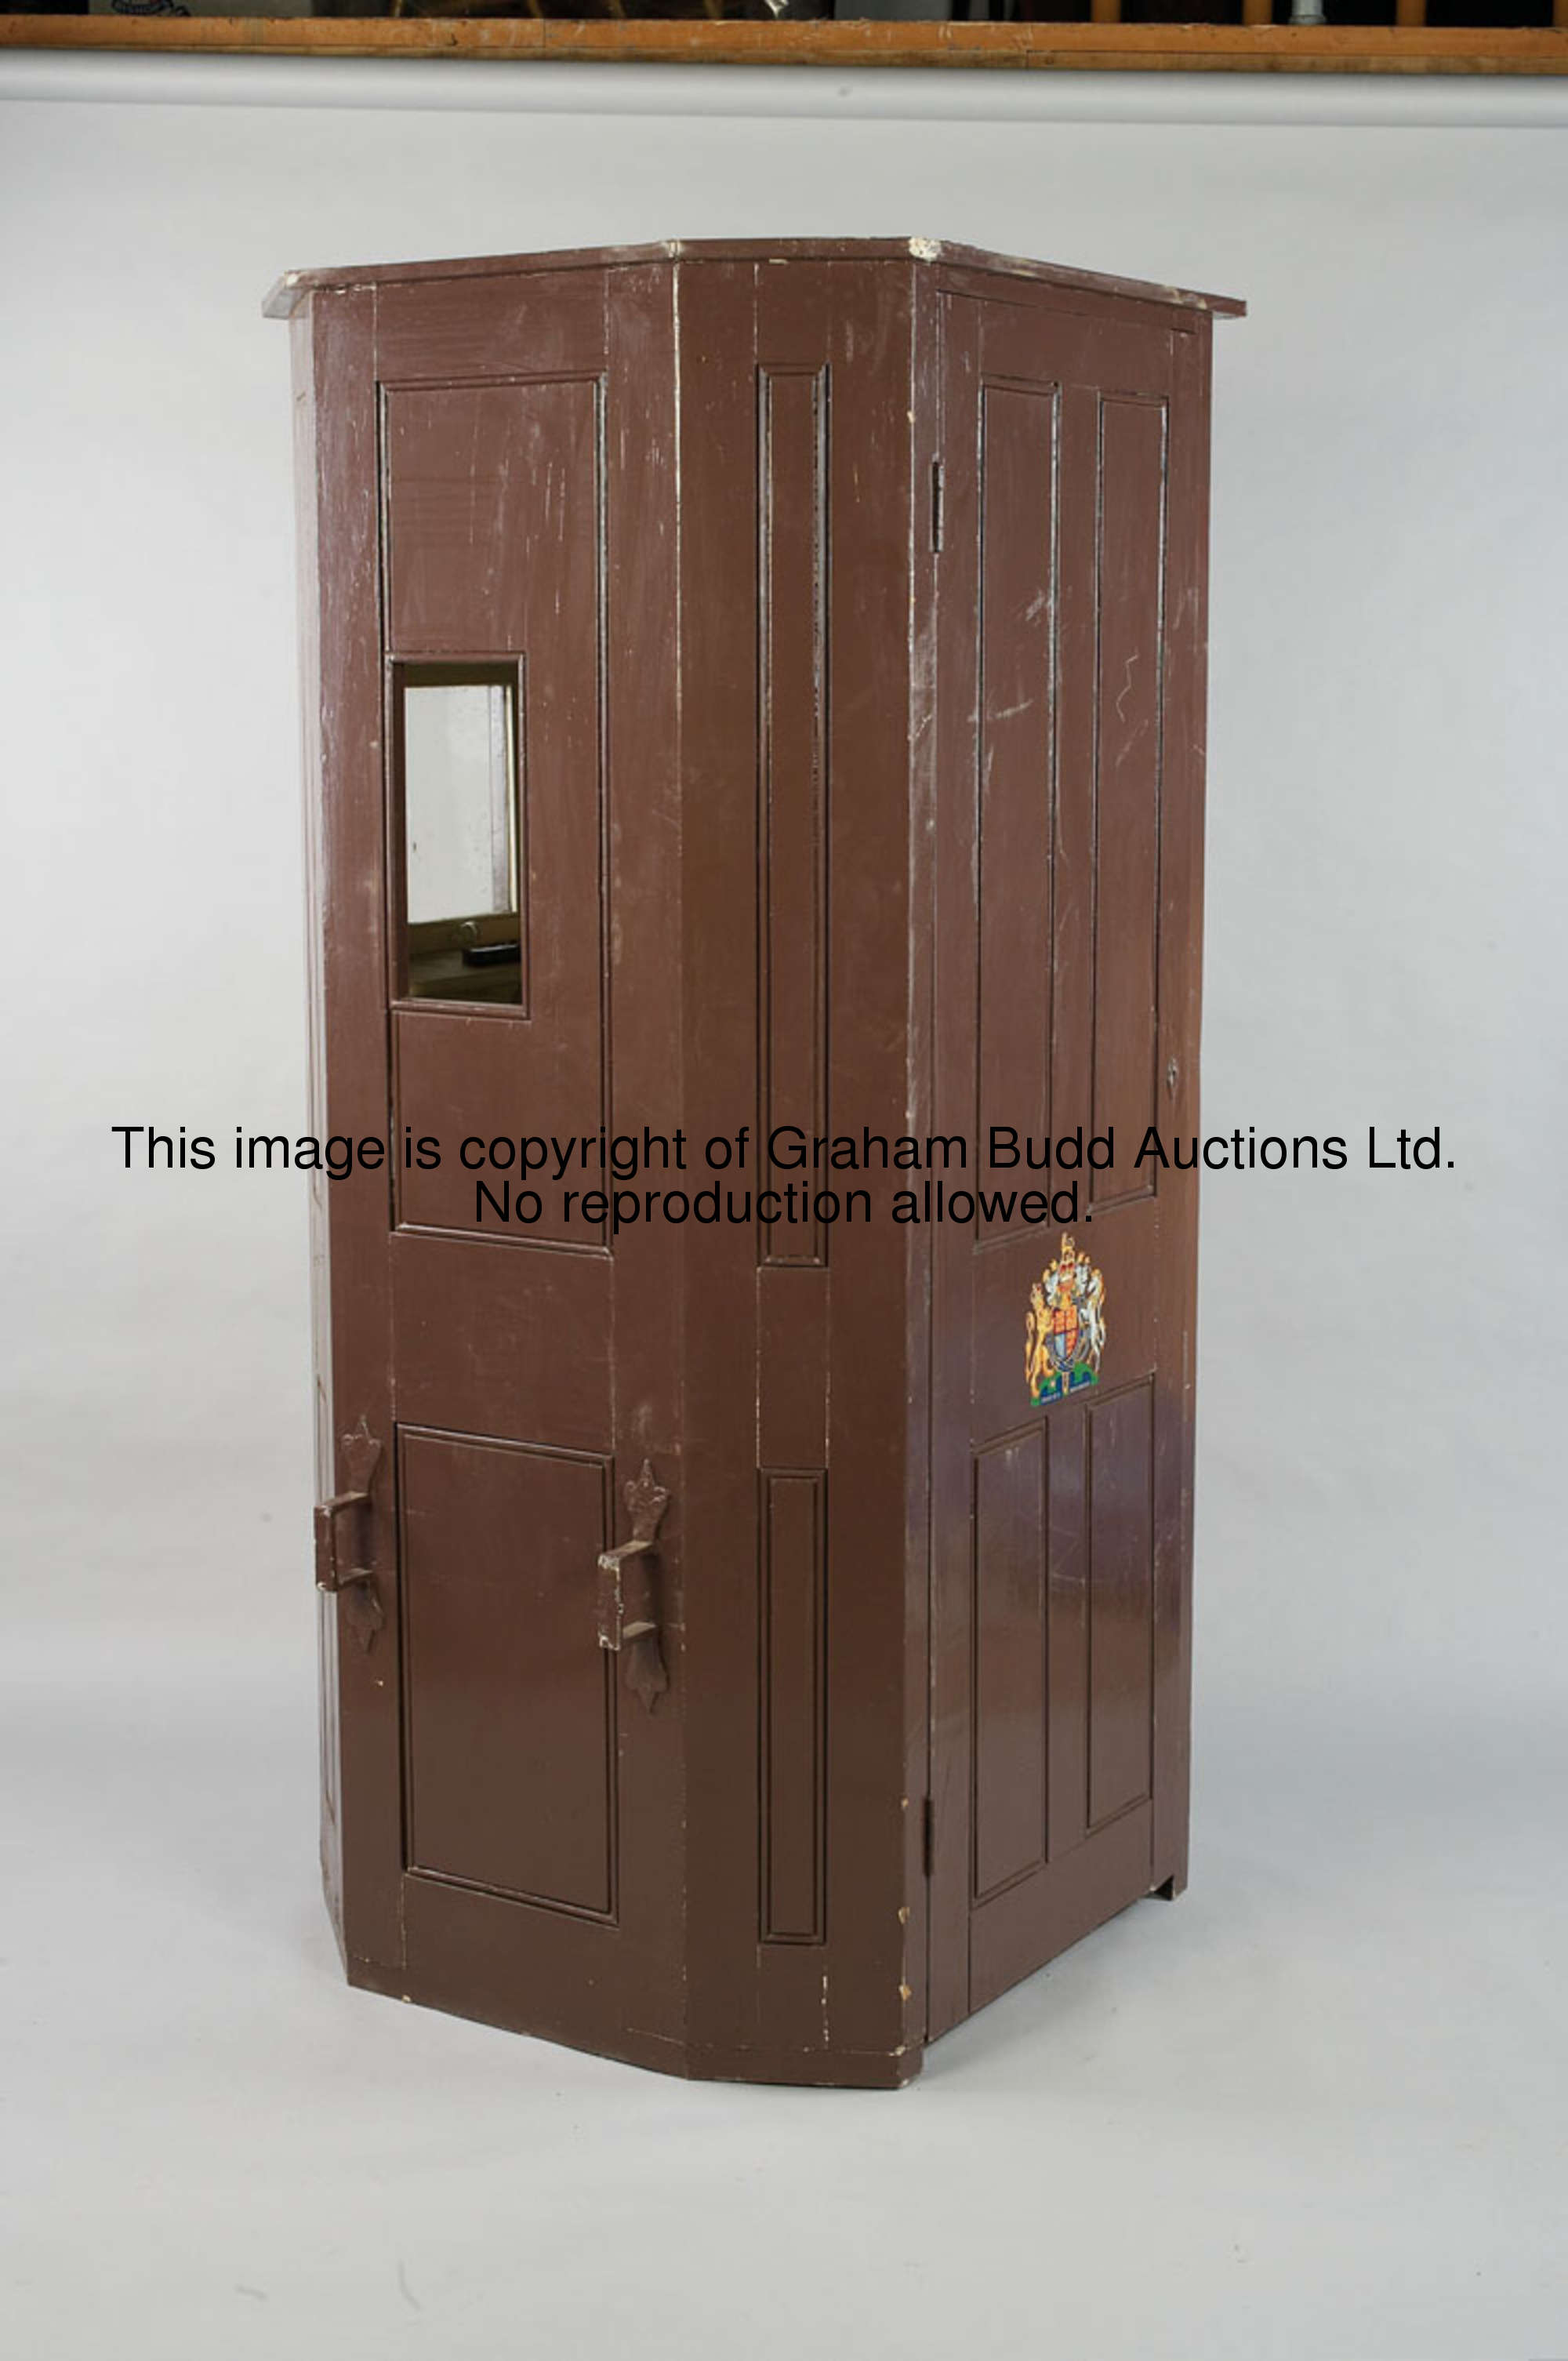 An Edwardian sedan-chair, bearing the royal coat of arms, brown painted wooden construction with gla...